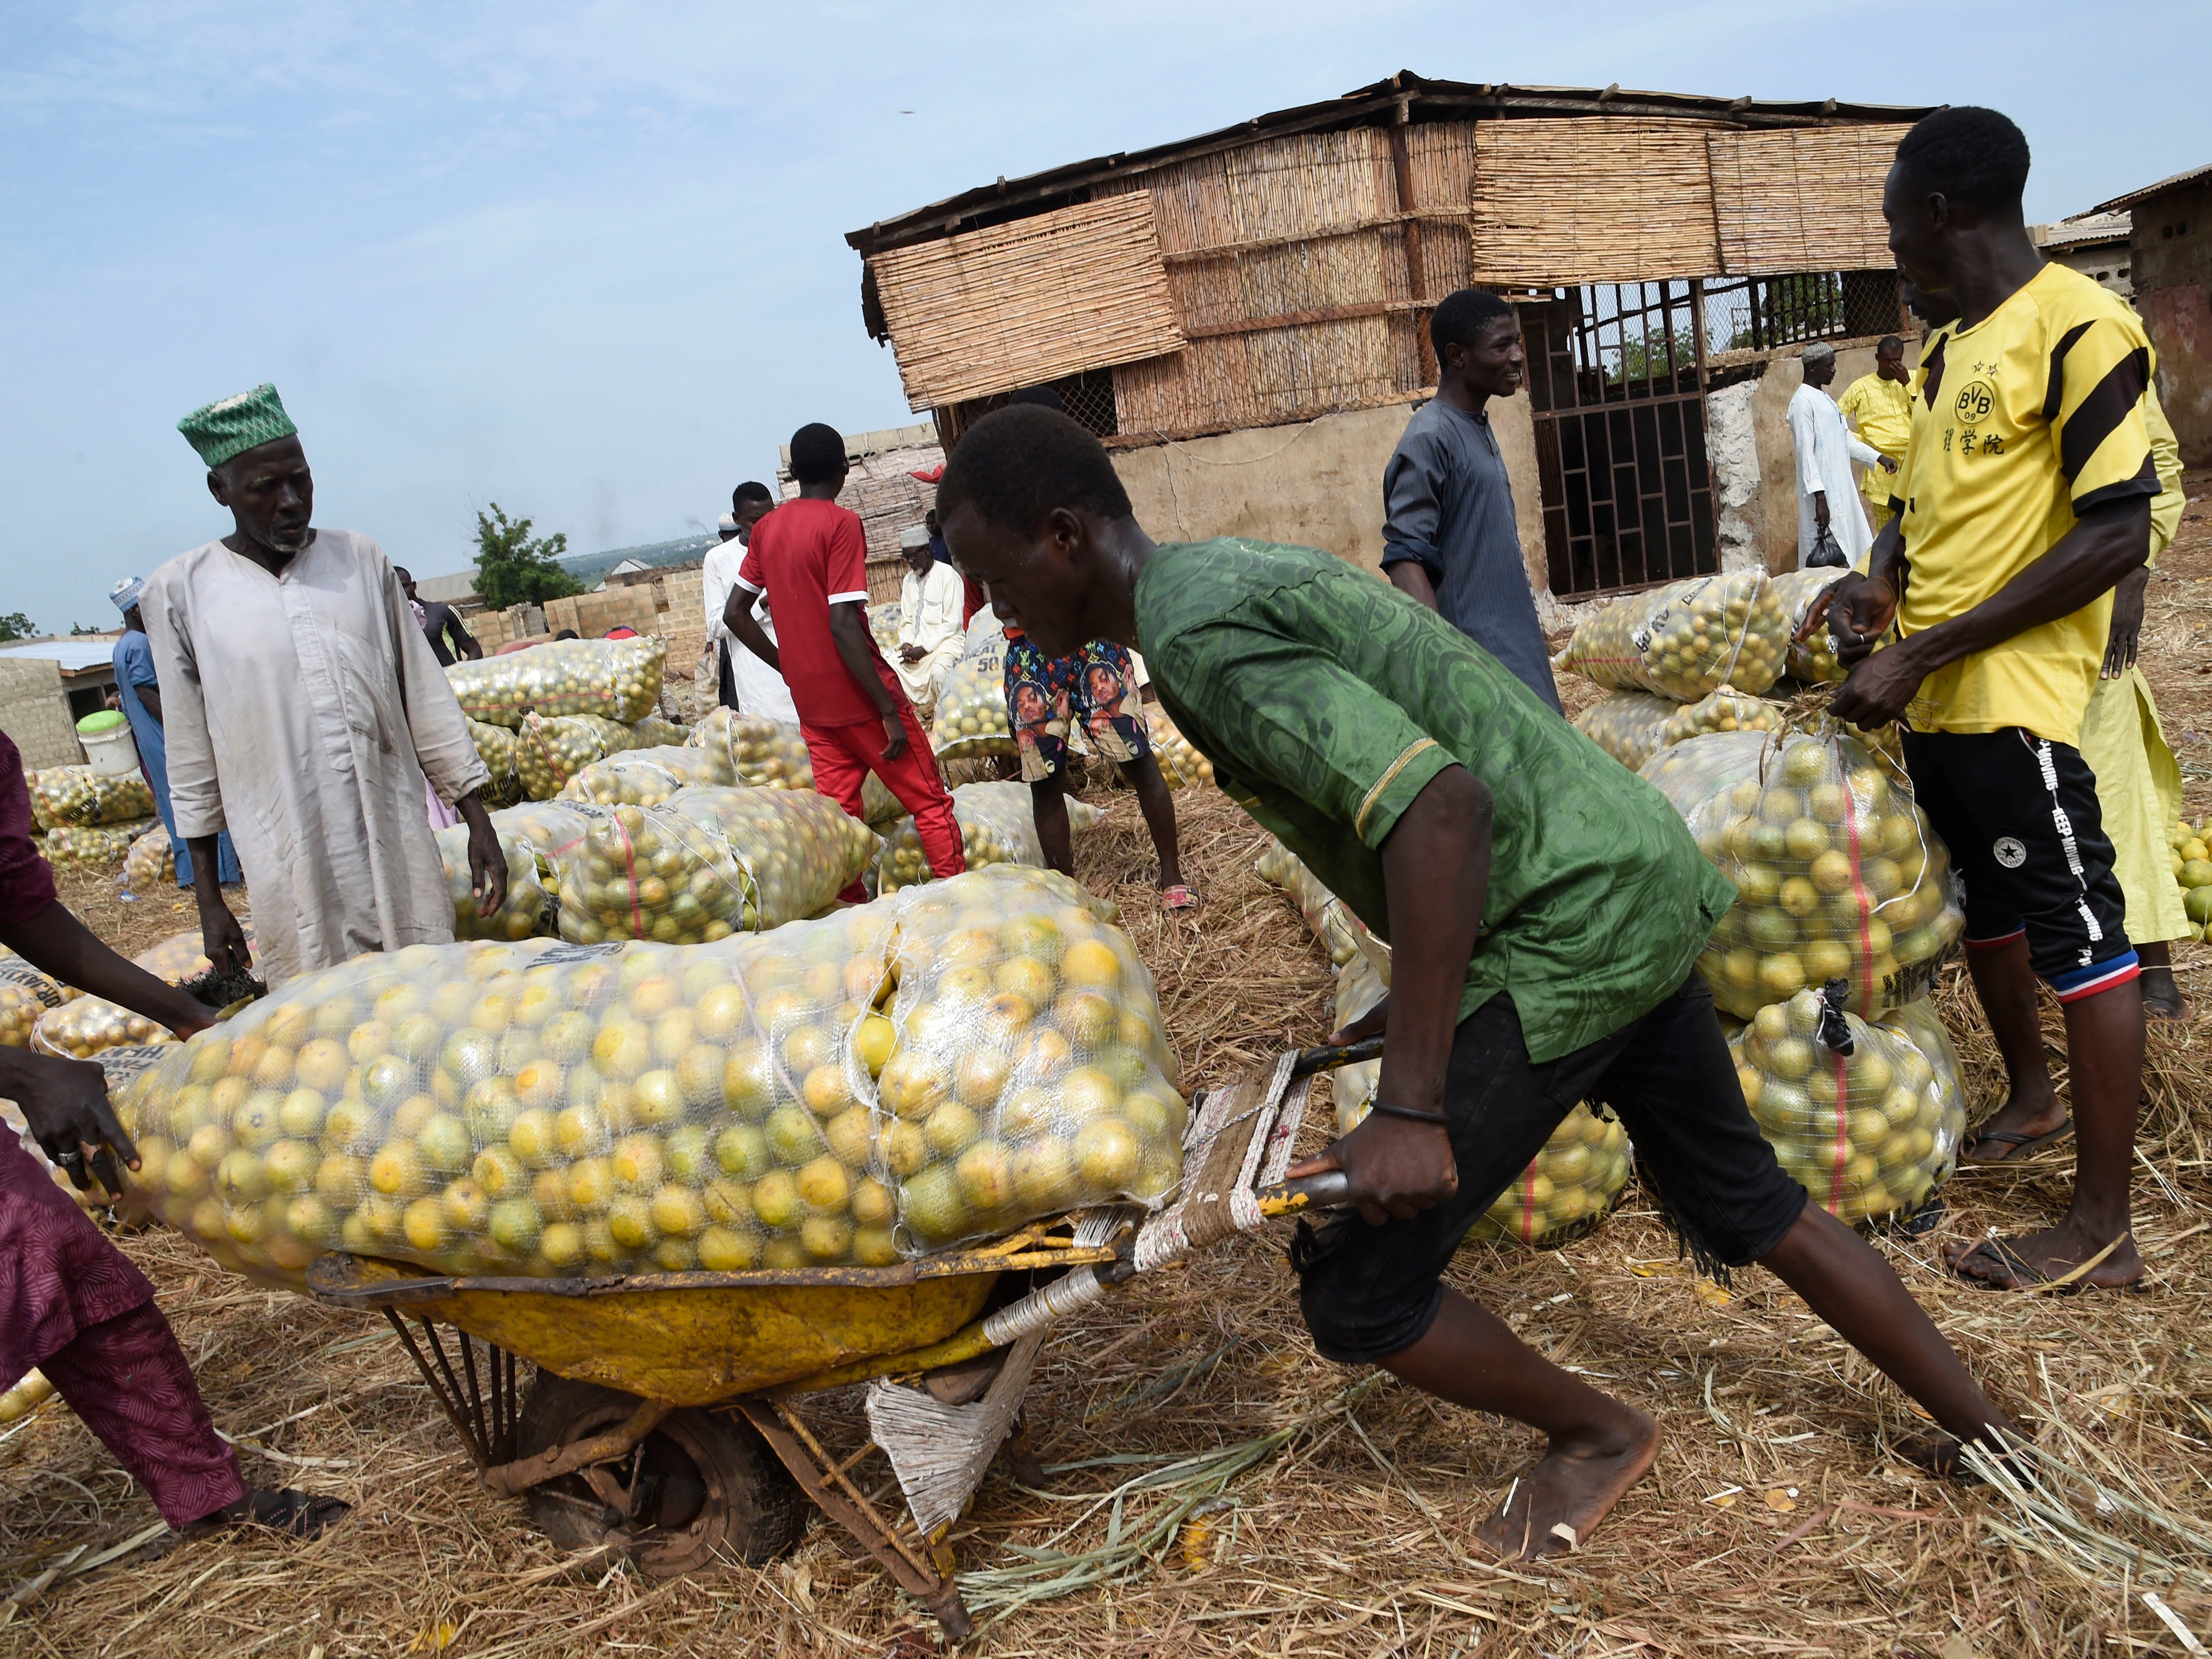 An unrelated image shows a market in Sokoto, which is facing a wave of attacks and kidnappings